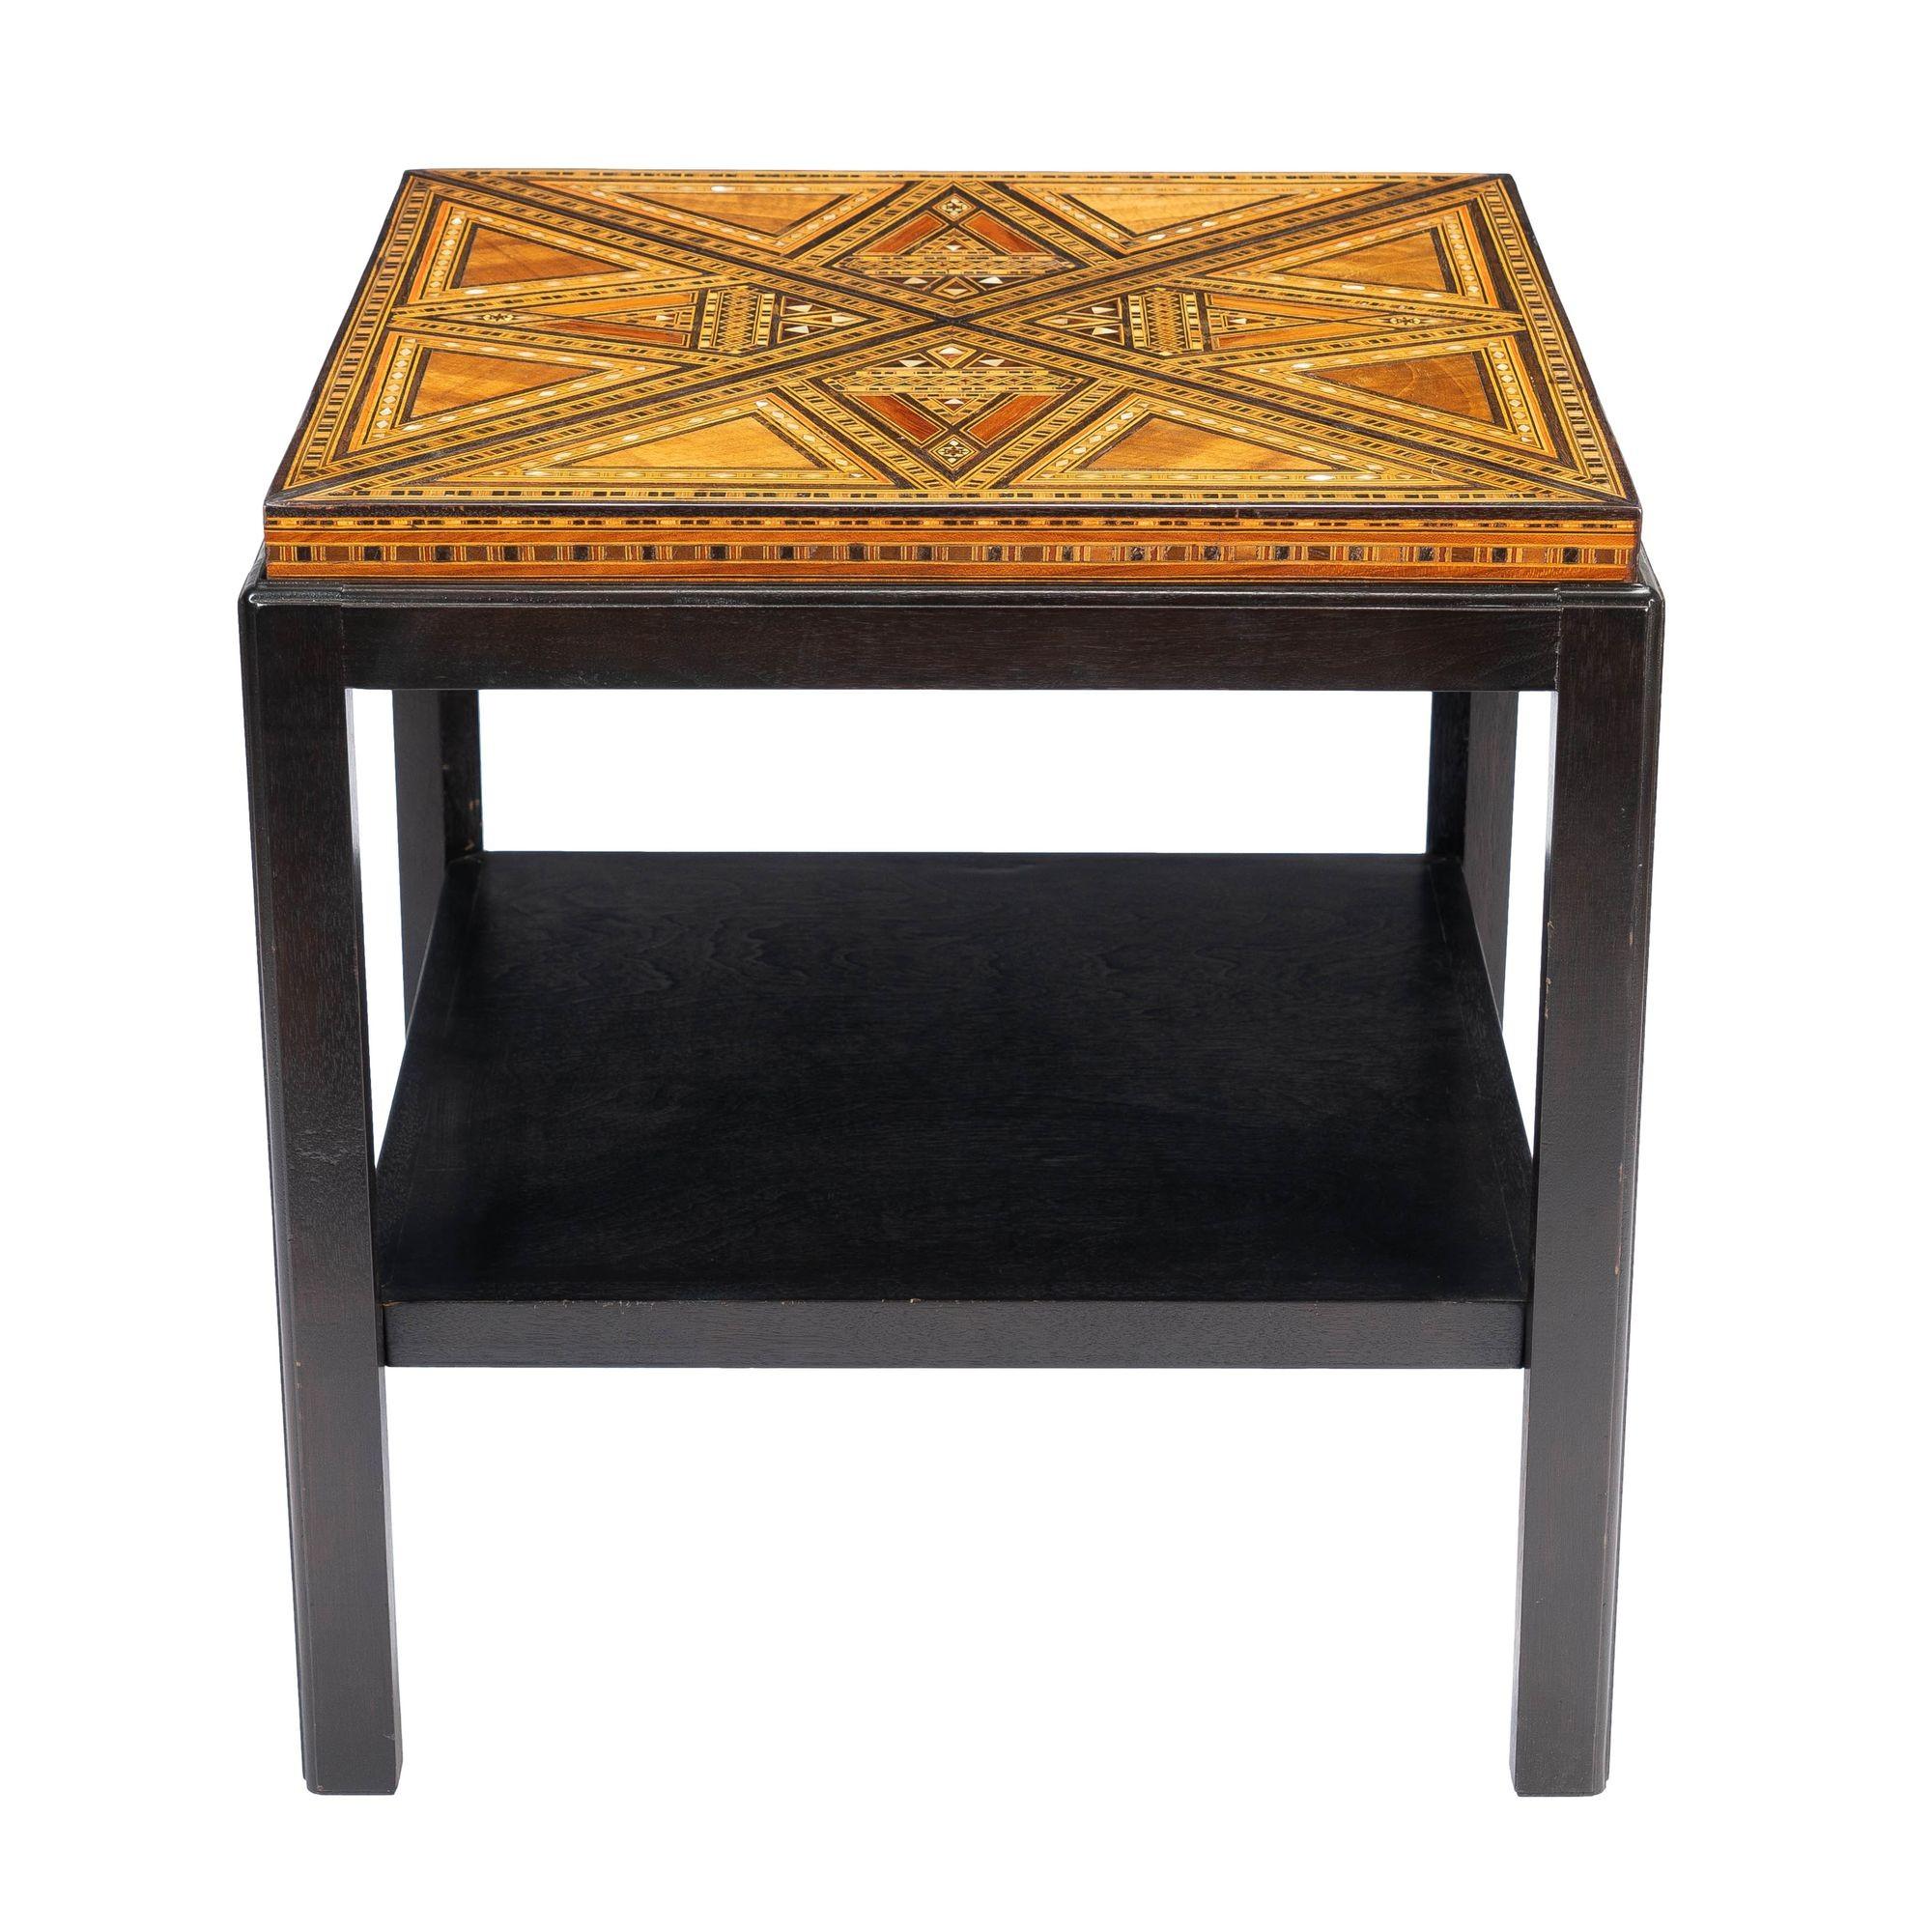 Syrian Damascus Inlaid Table Top on Custom Stand, c. 1900 For Sale